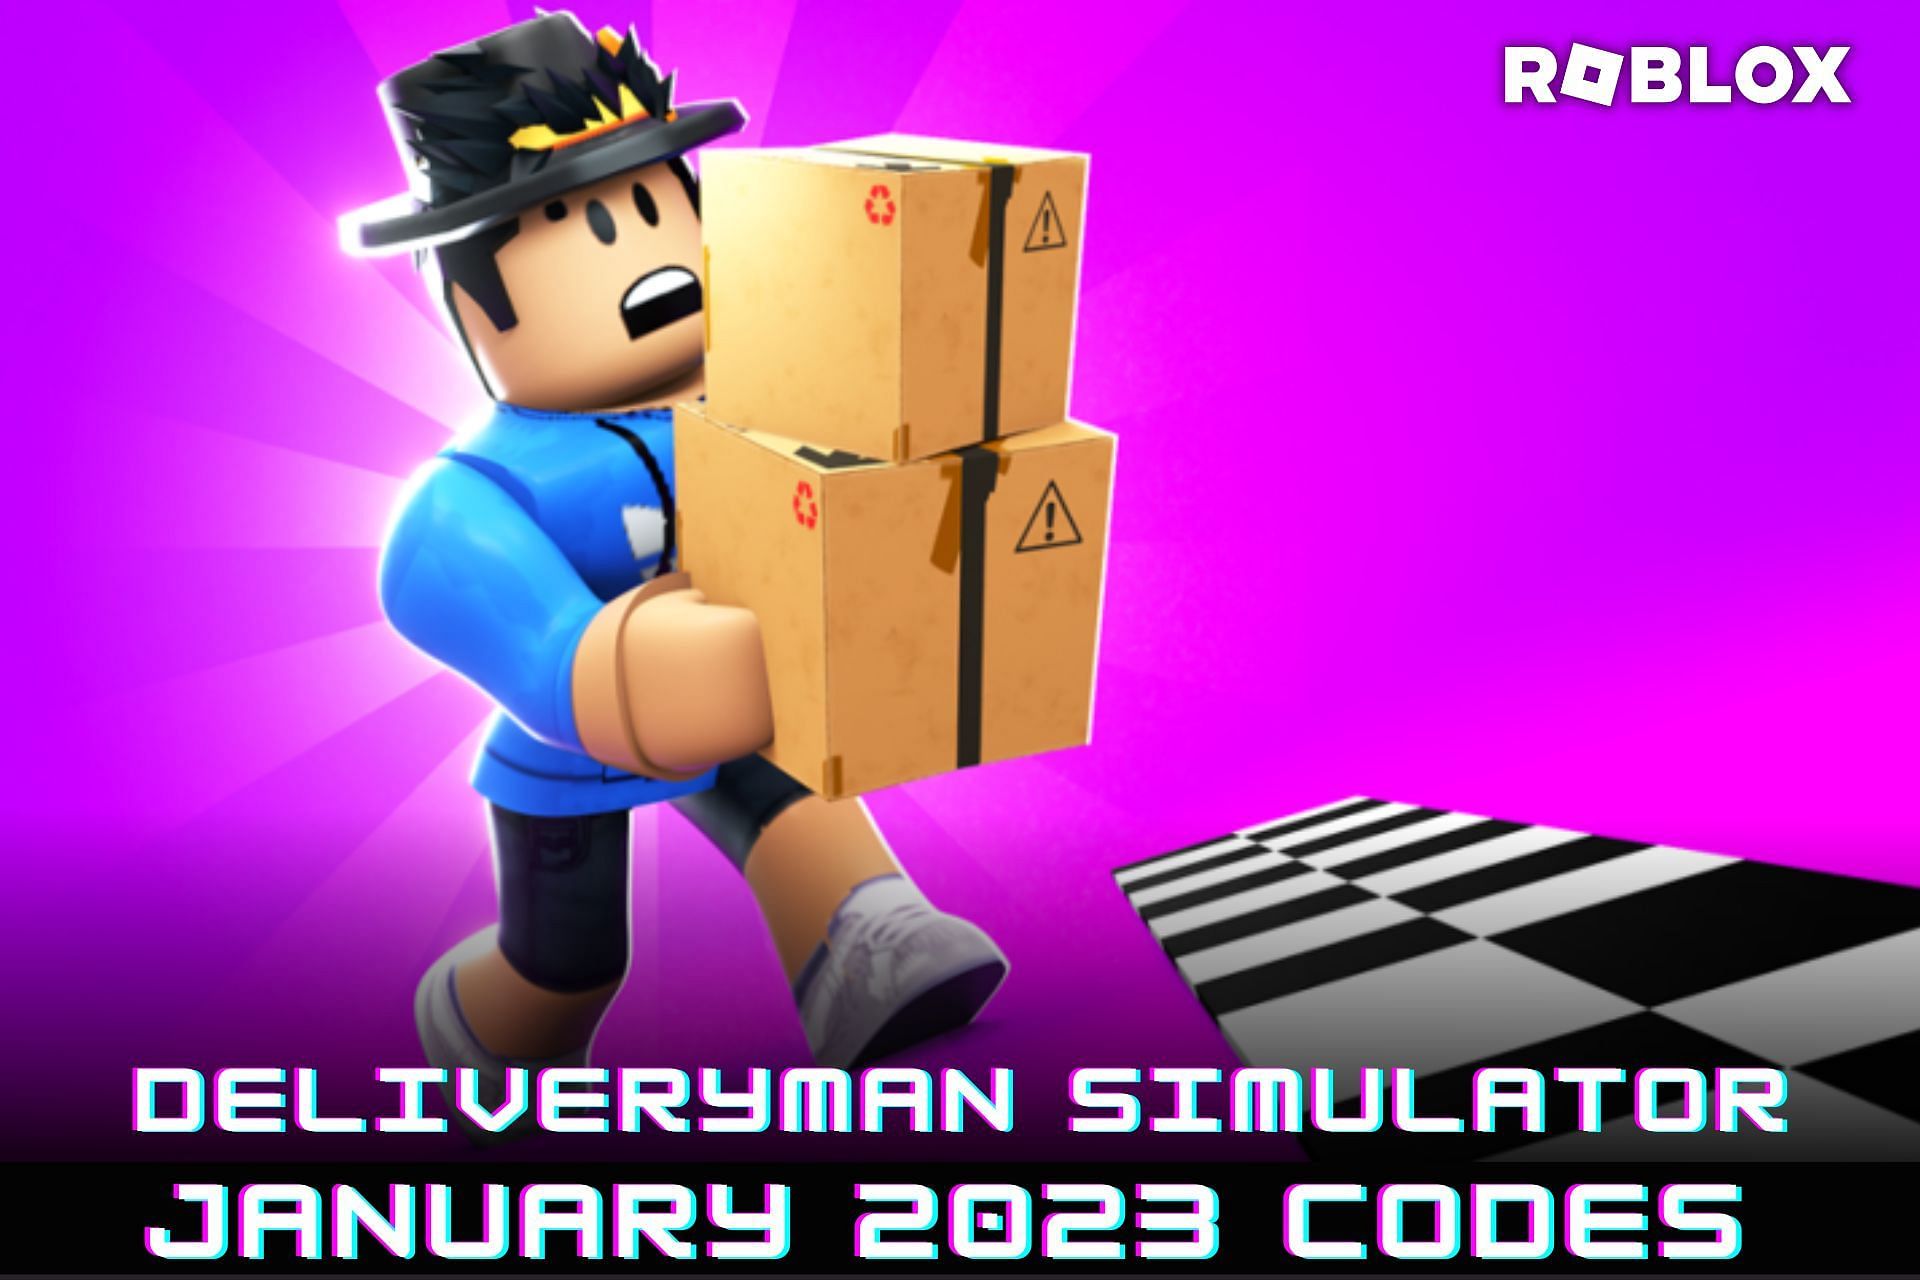 roblox-deliveryman-simulator-codes-for-january-2023-free-spins-boosts